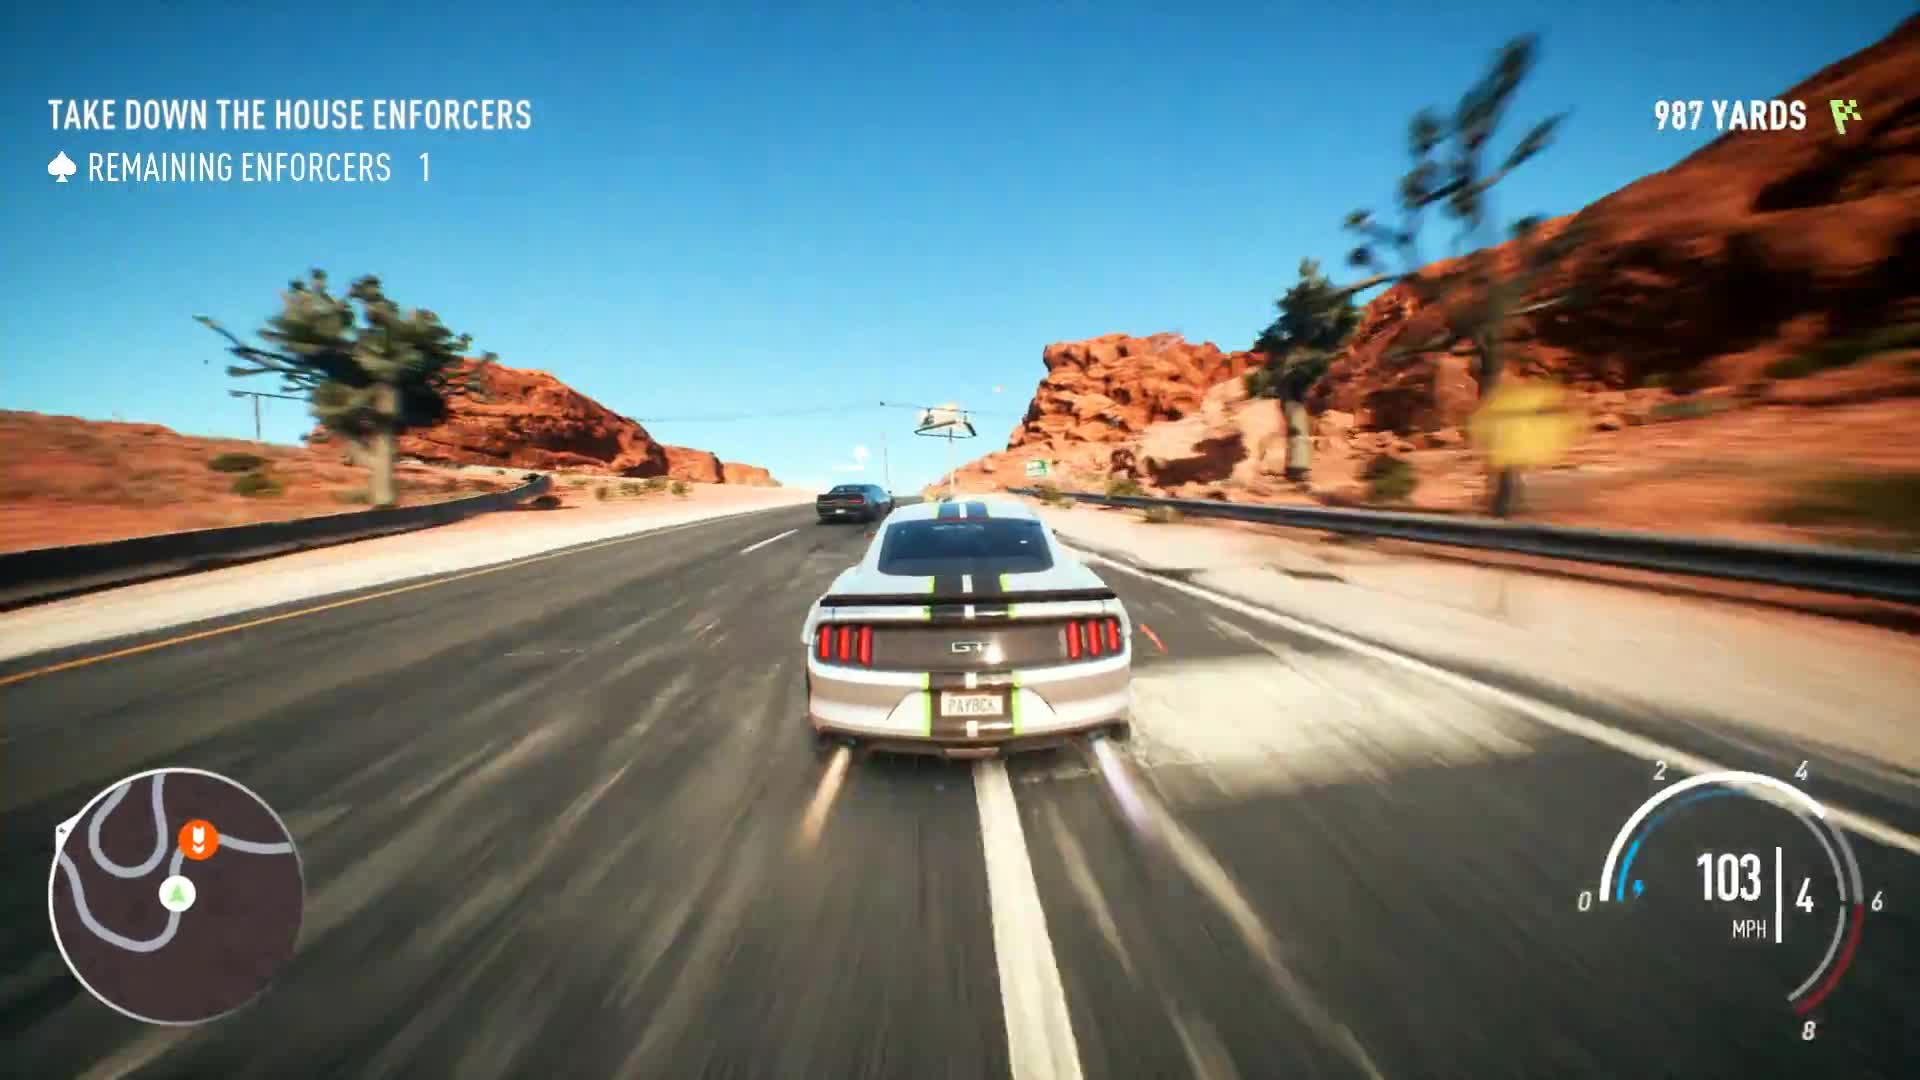 Need for Speed Payback